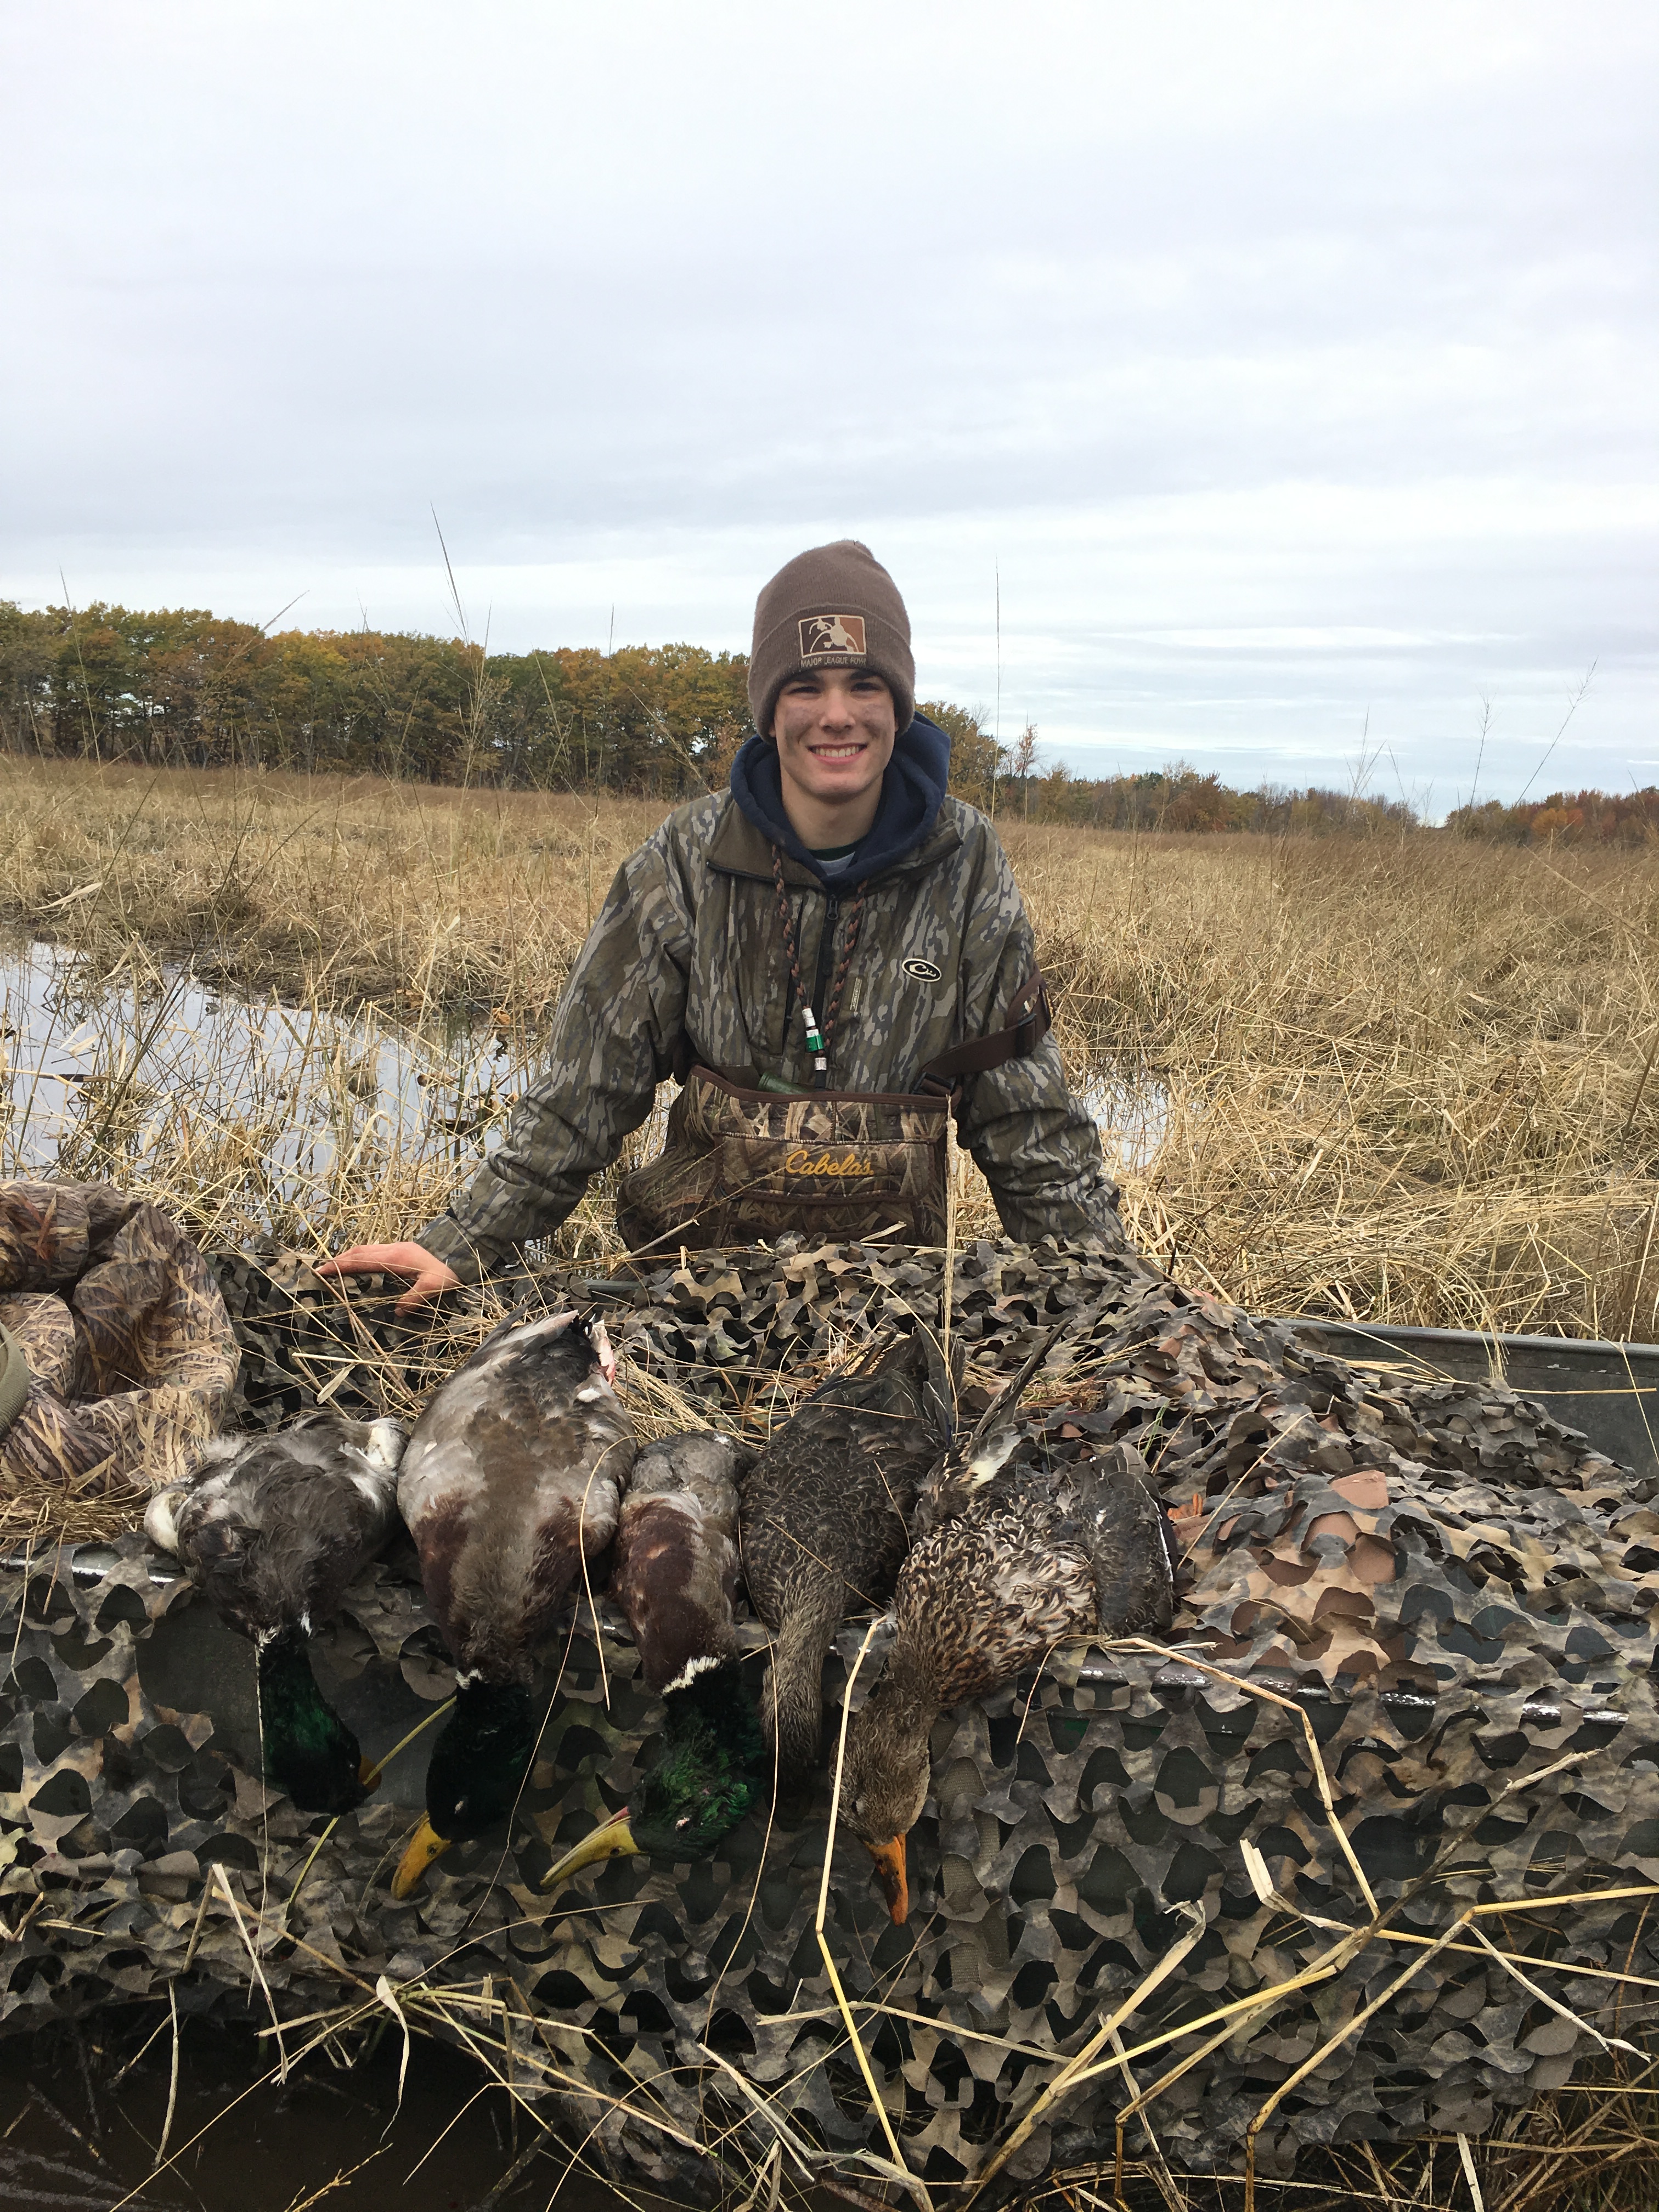 waterfowl hunting at the Missisquoi NWR; a successful youth hunter